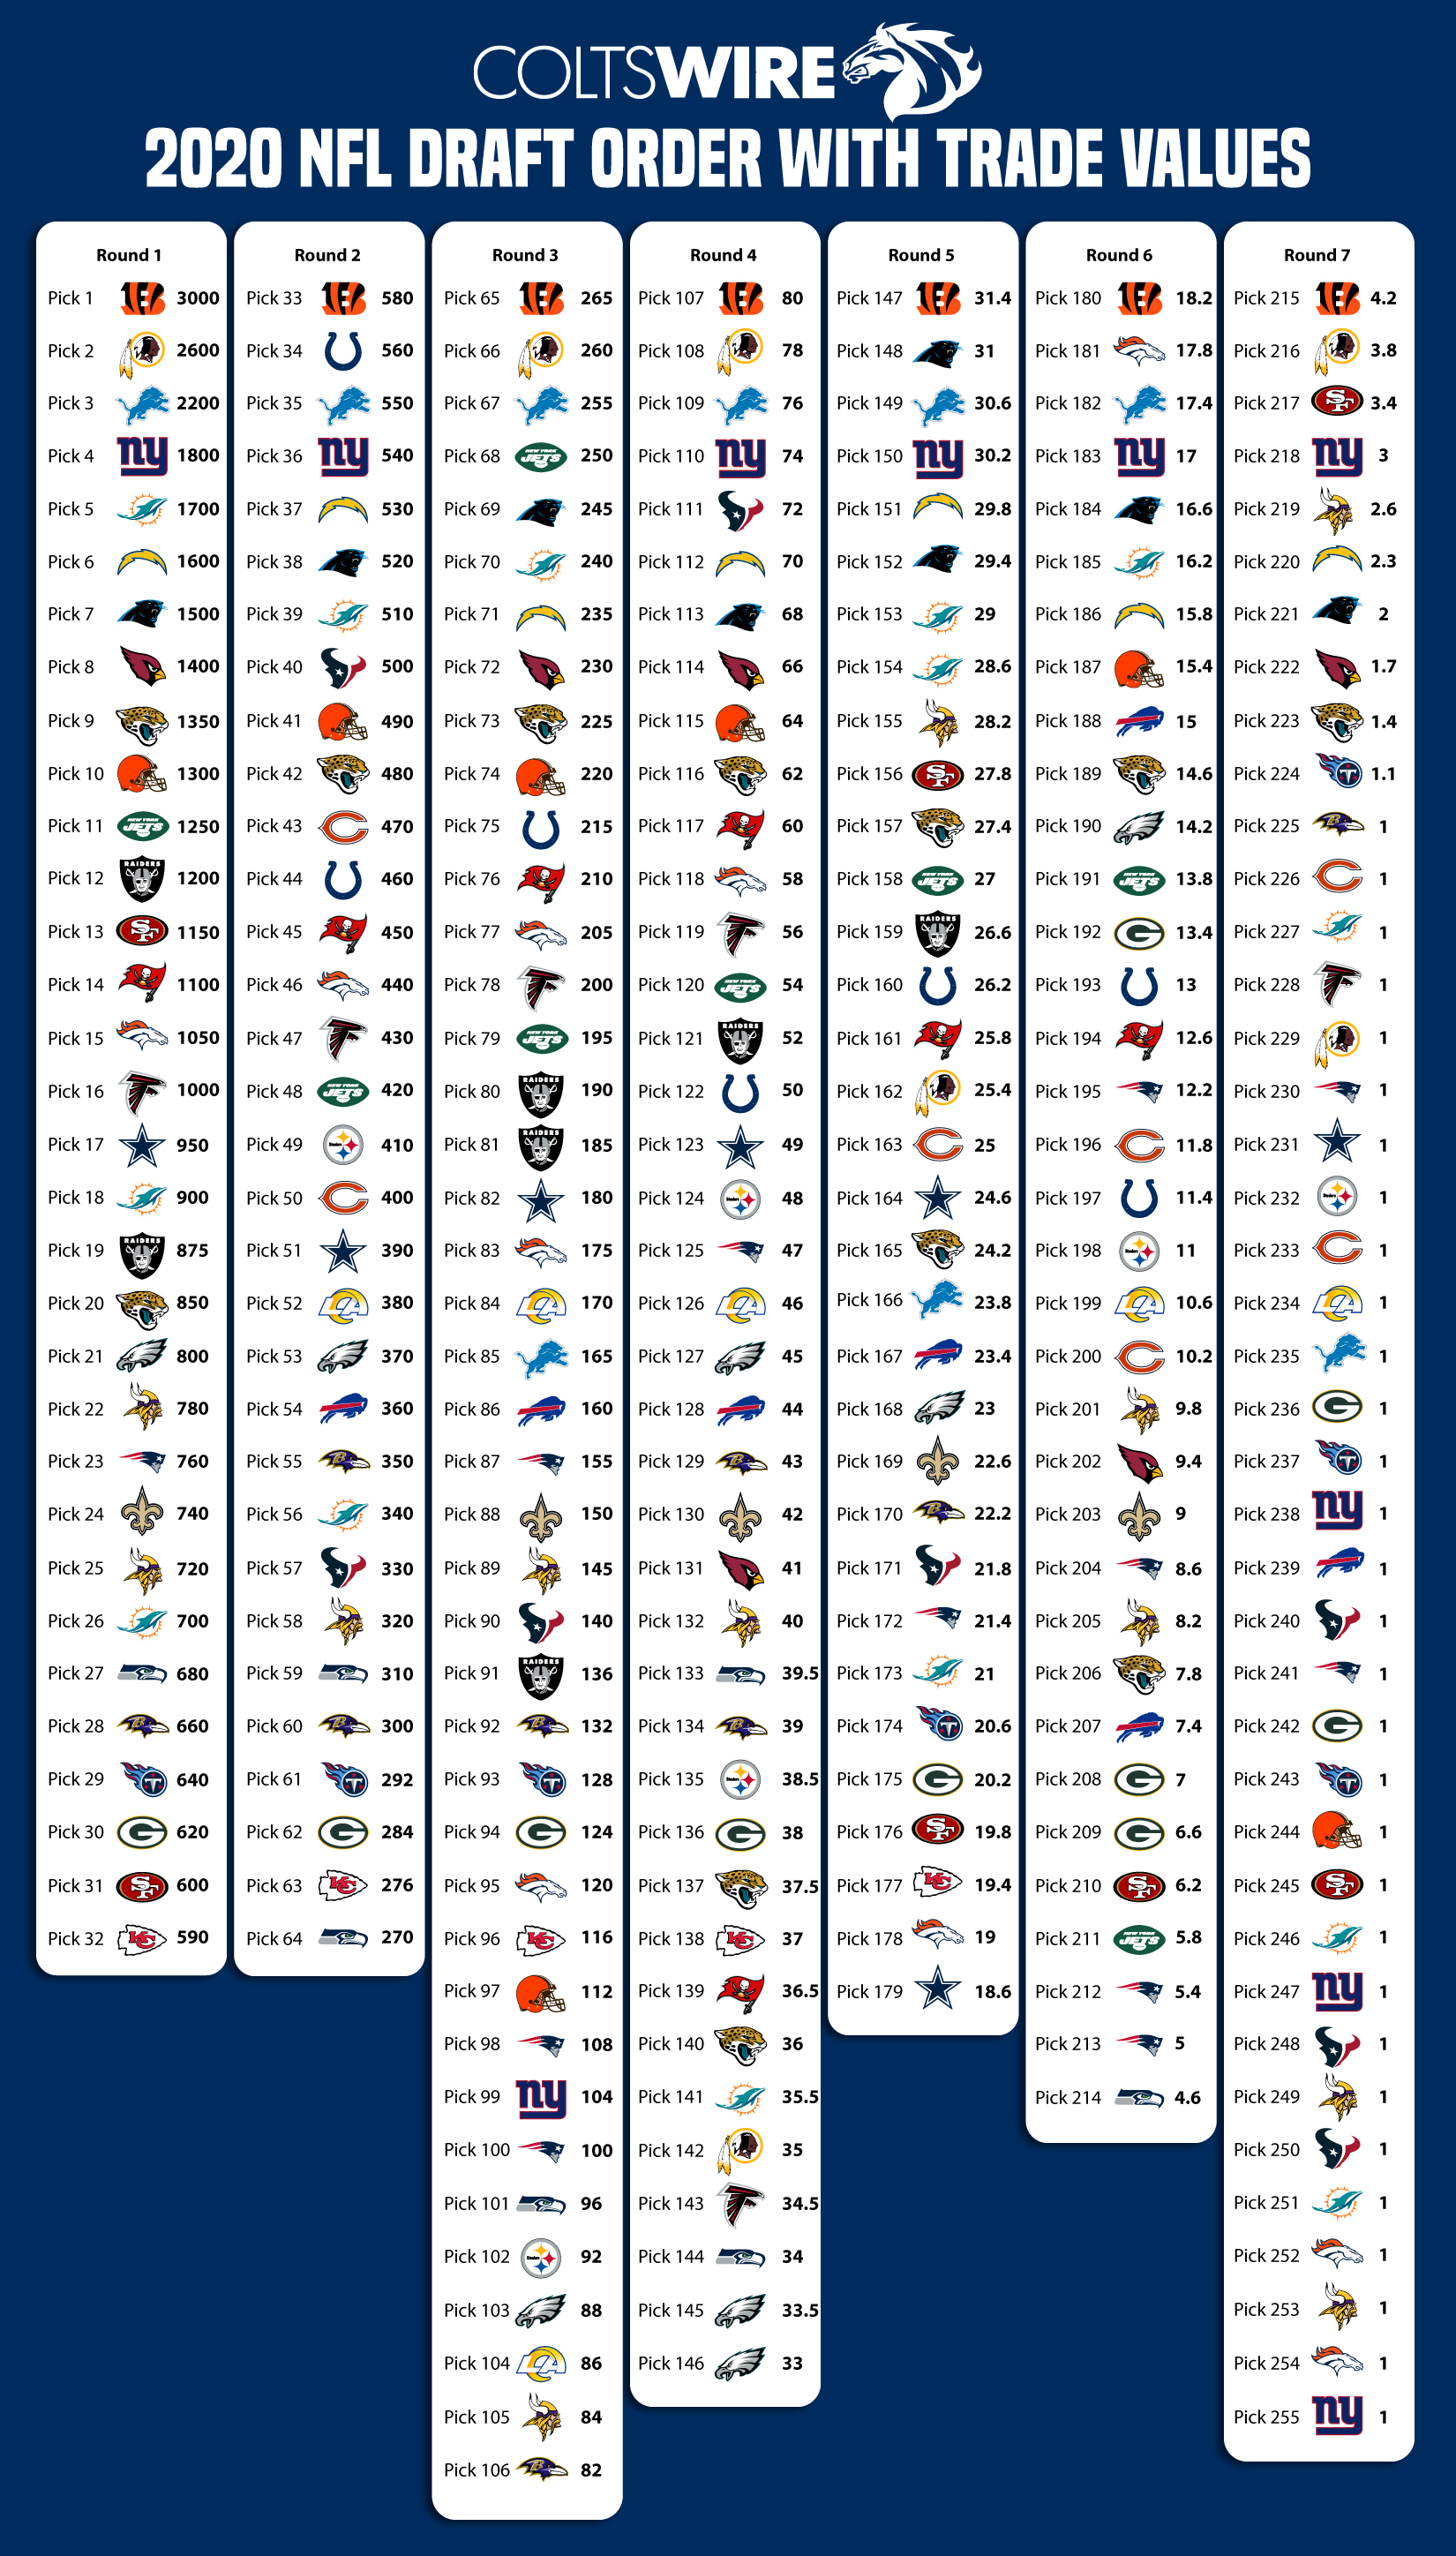 2020 NFL draft: Full 7-round order with trade values for every pick